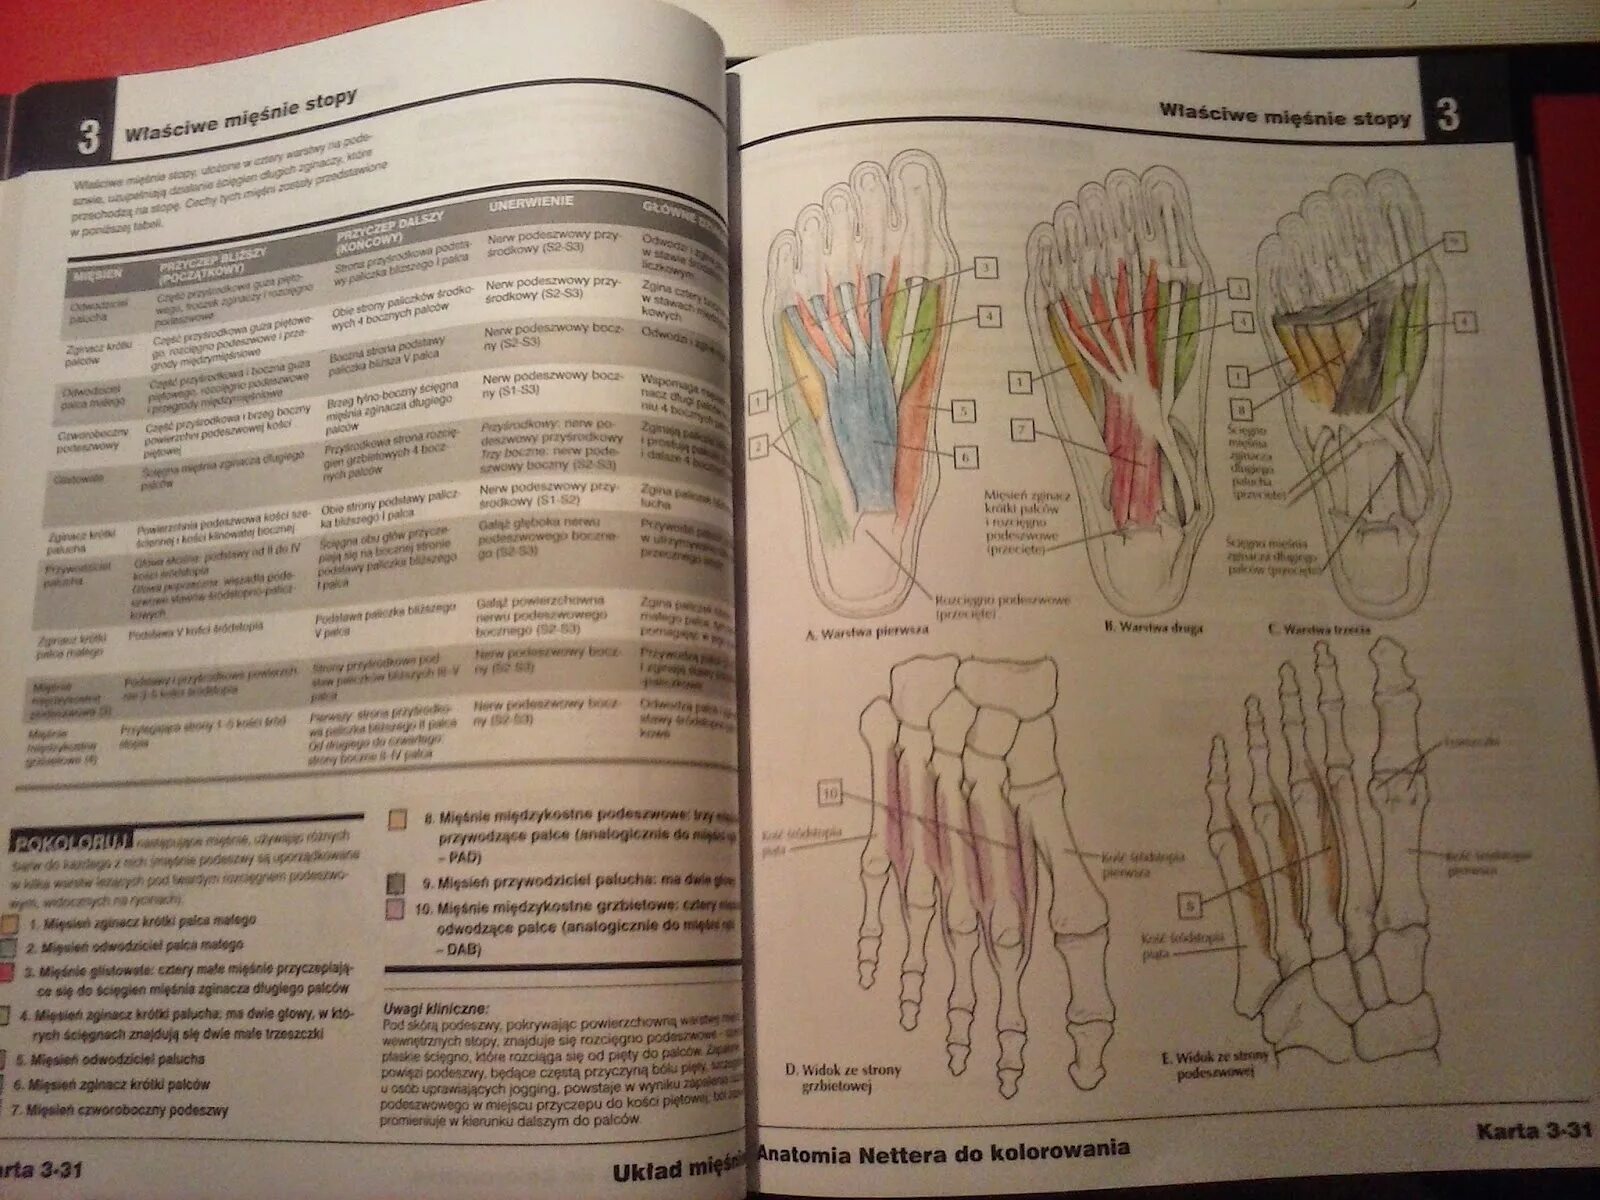 Coloring book atlas of bizarre physiology